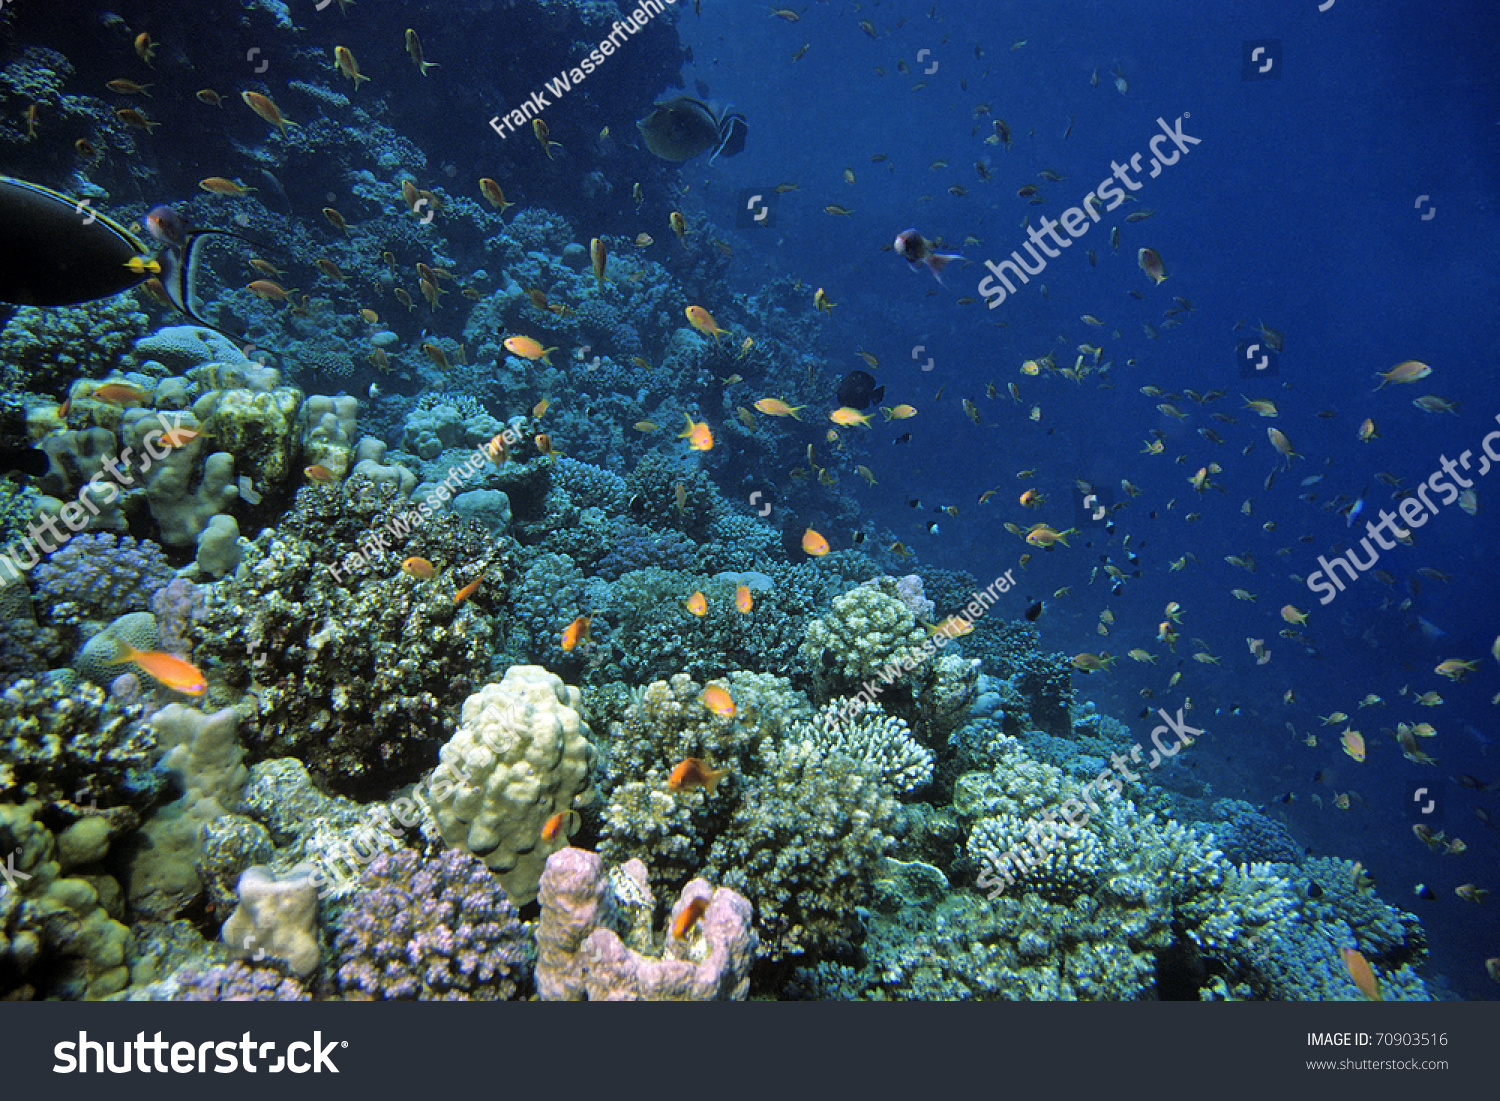 Red Sea Coral Reef Egypt Stock Photo 70903516 - Shutterstock